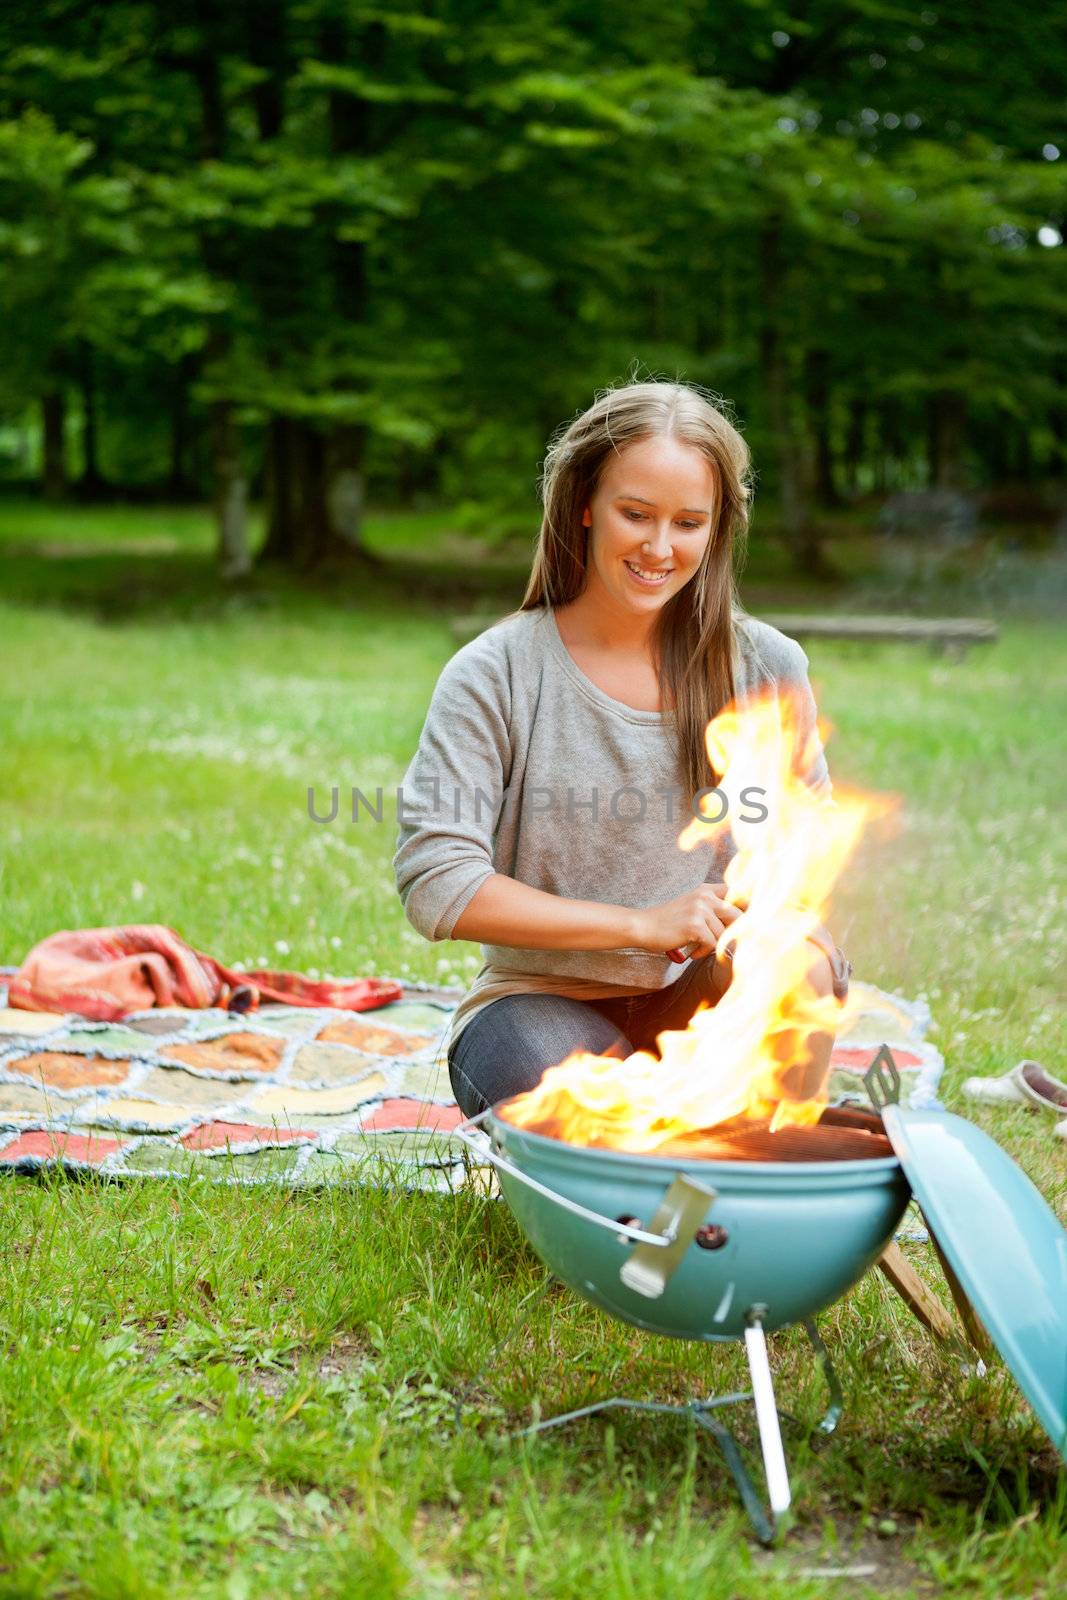 Beautiful young woman sitting in front of flaming portable barbecue at an outdoor picnic